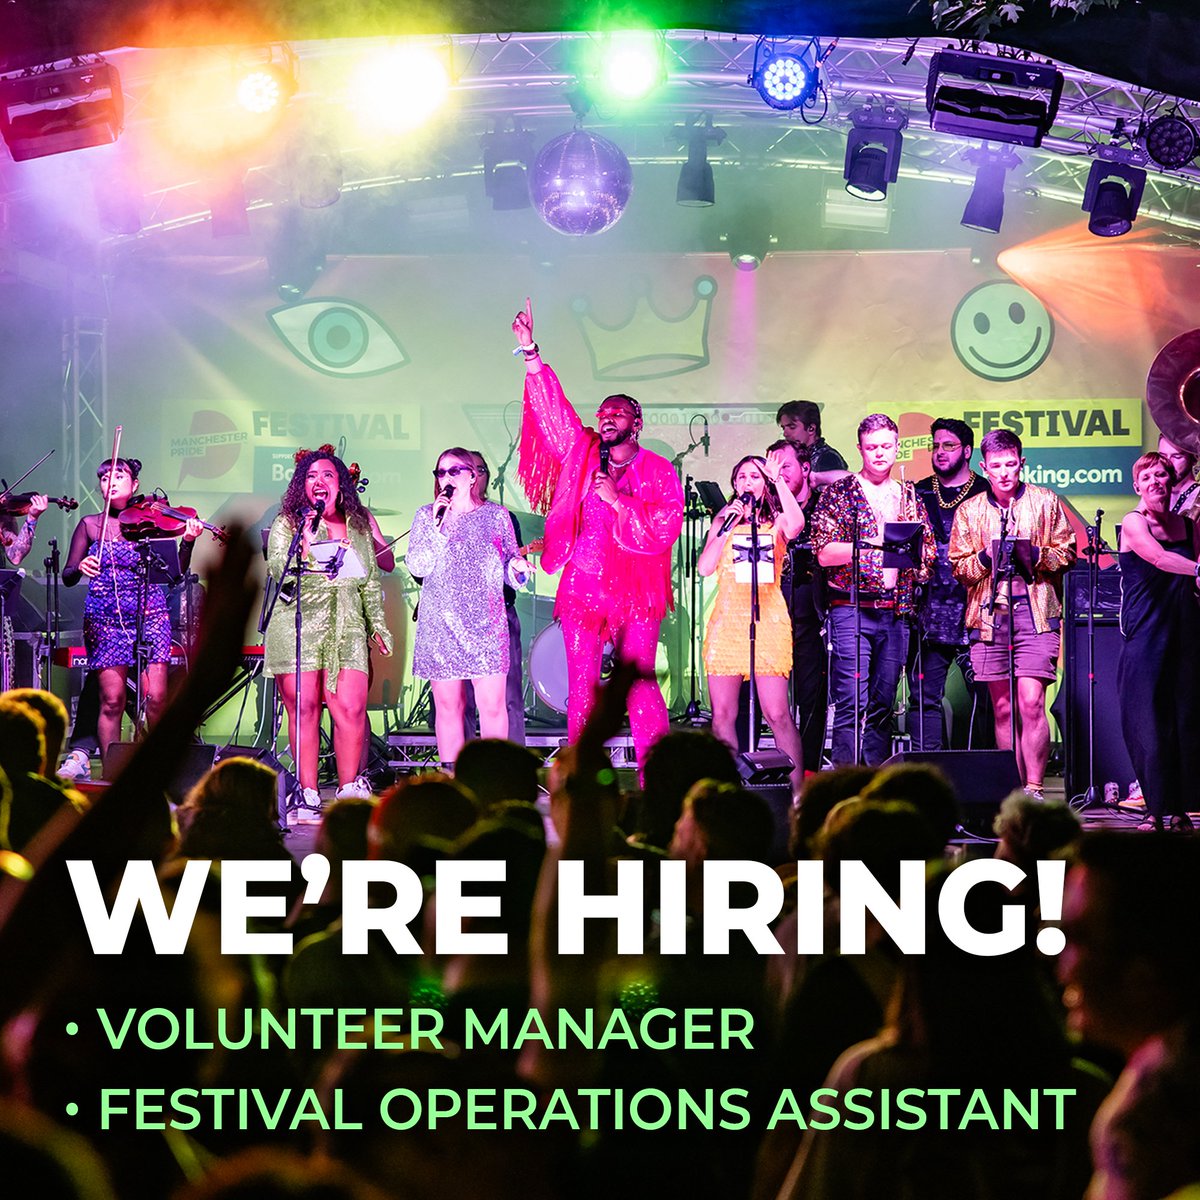 WE’RE HIRING! 🏳️‍🌈🏳️‍⚧️ We’re looking for two passionate individuals to join the Manchester Pride team! Could you be our next Volunteer Manager or Festival Operations Assistant?! Find out all you need to know about each role and apply at manchesterpride.com/jobs ✨